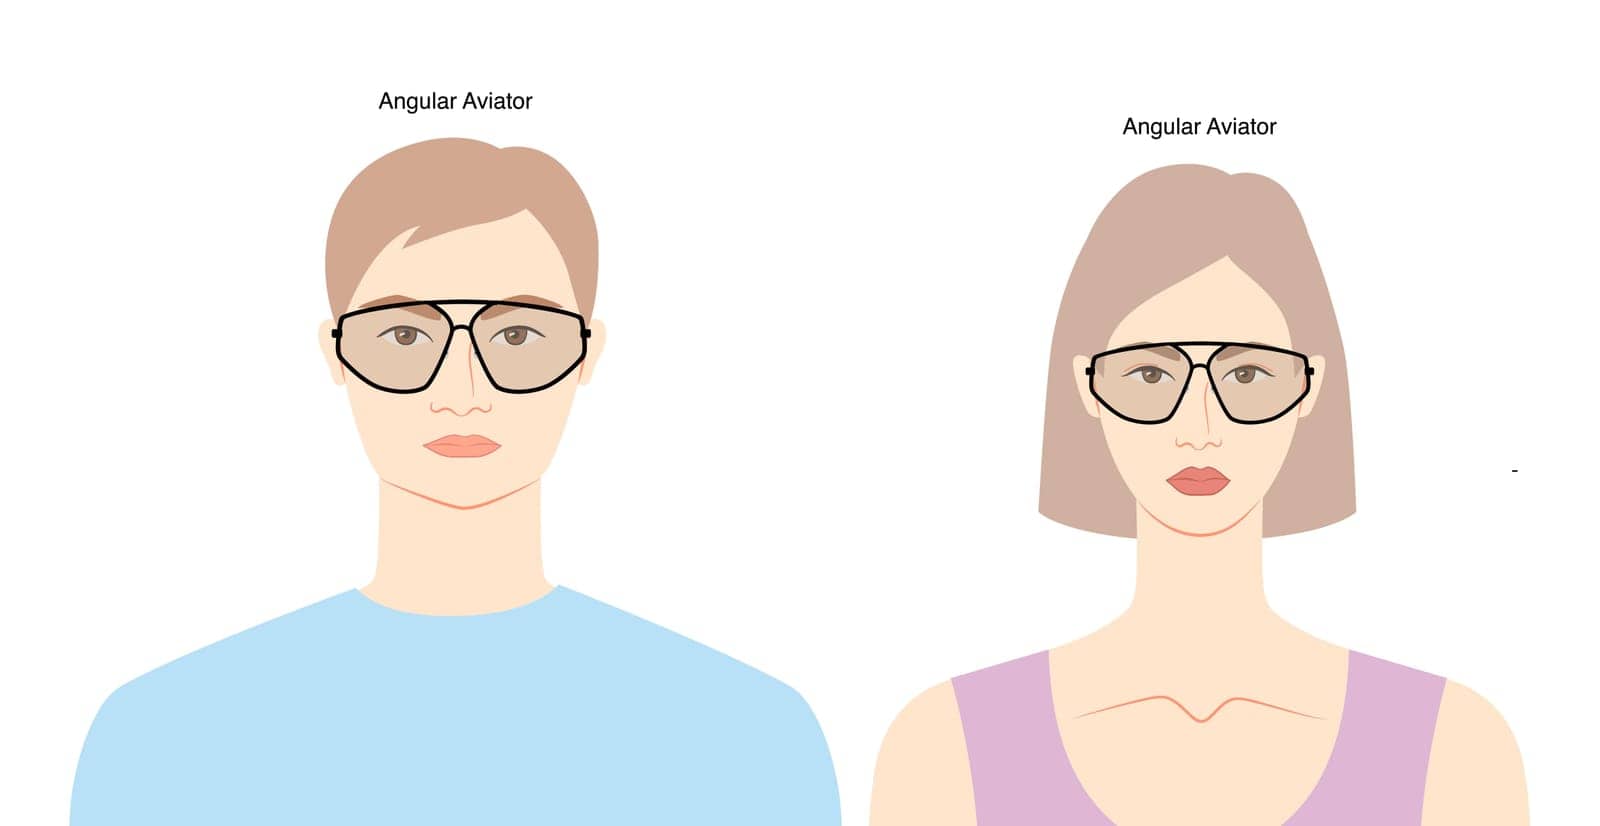 Angular Aviator frame glasses on women and men flat character fashion accessory illustration. Sunglass front view silhouette style, rim spectacles eyeglasses with lens sketch outline isolated on white